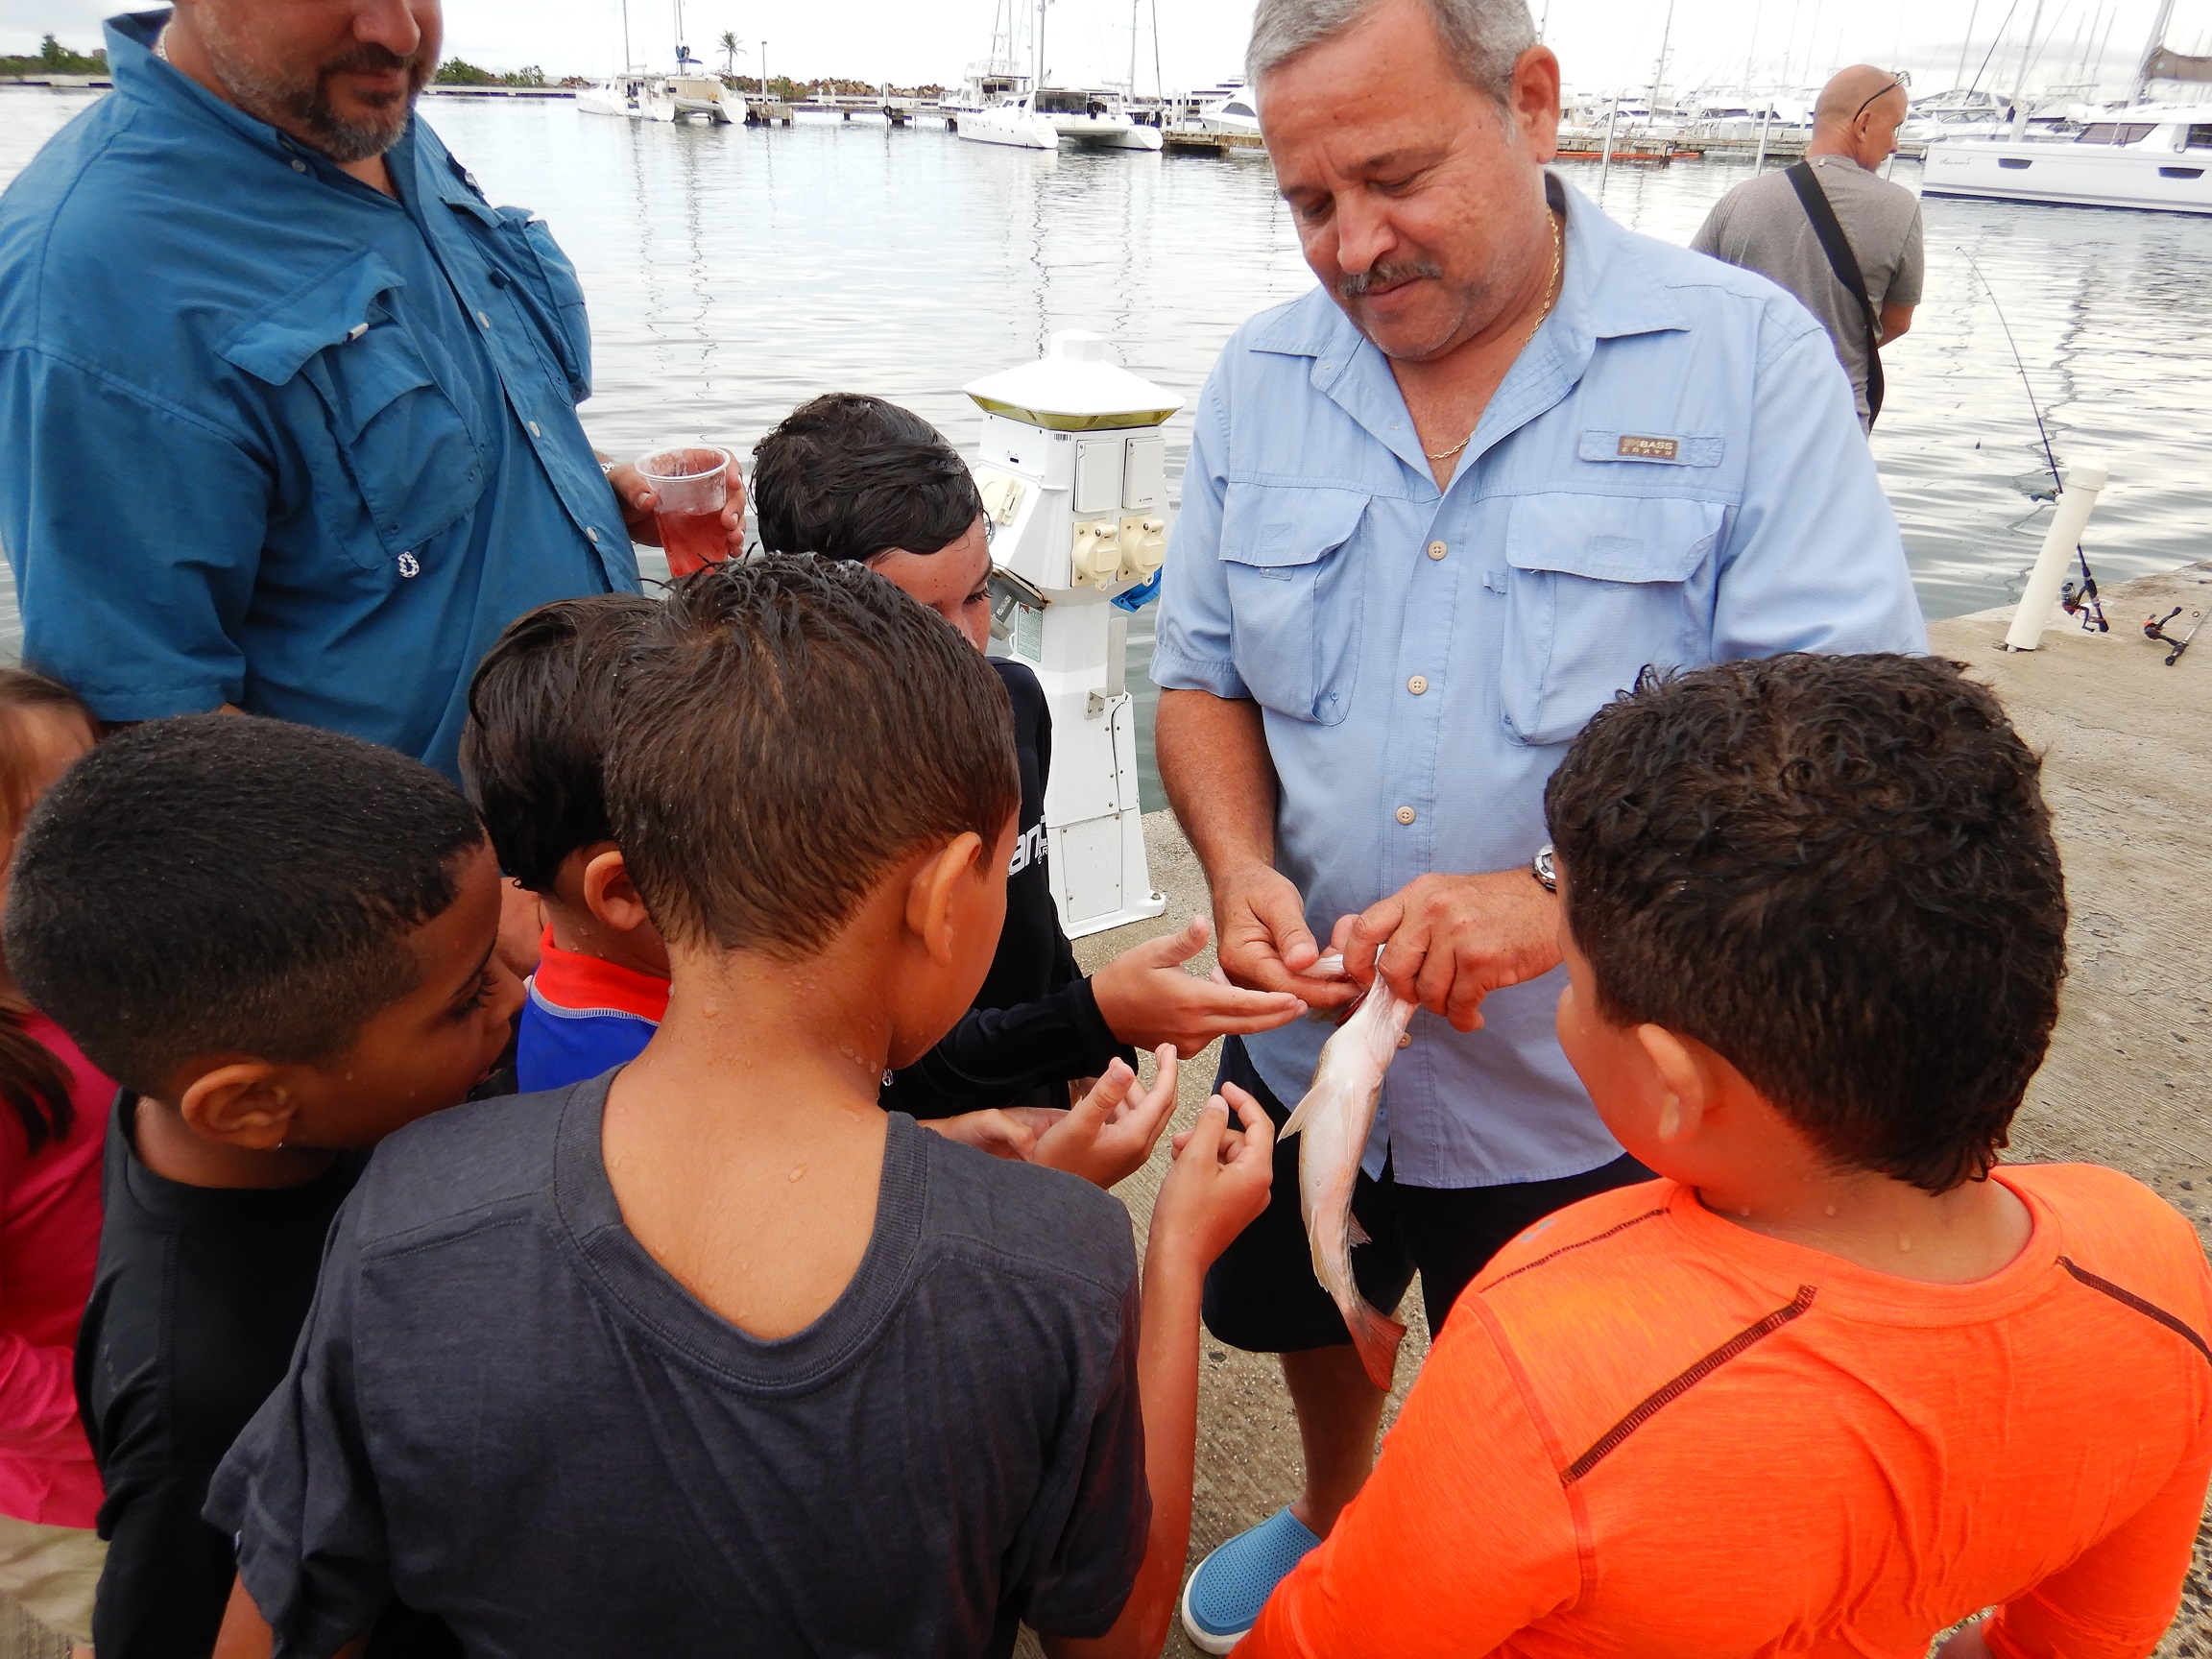 Suzuki Del Caribe continues its commitment to children and fishing.